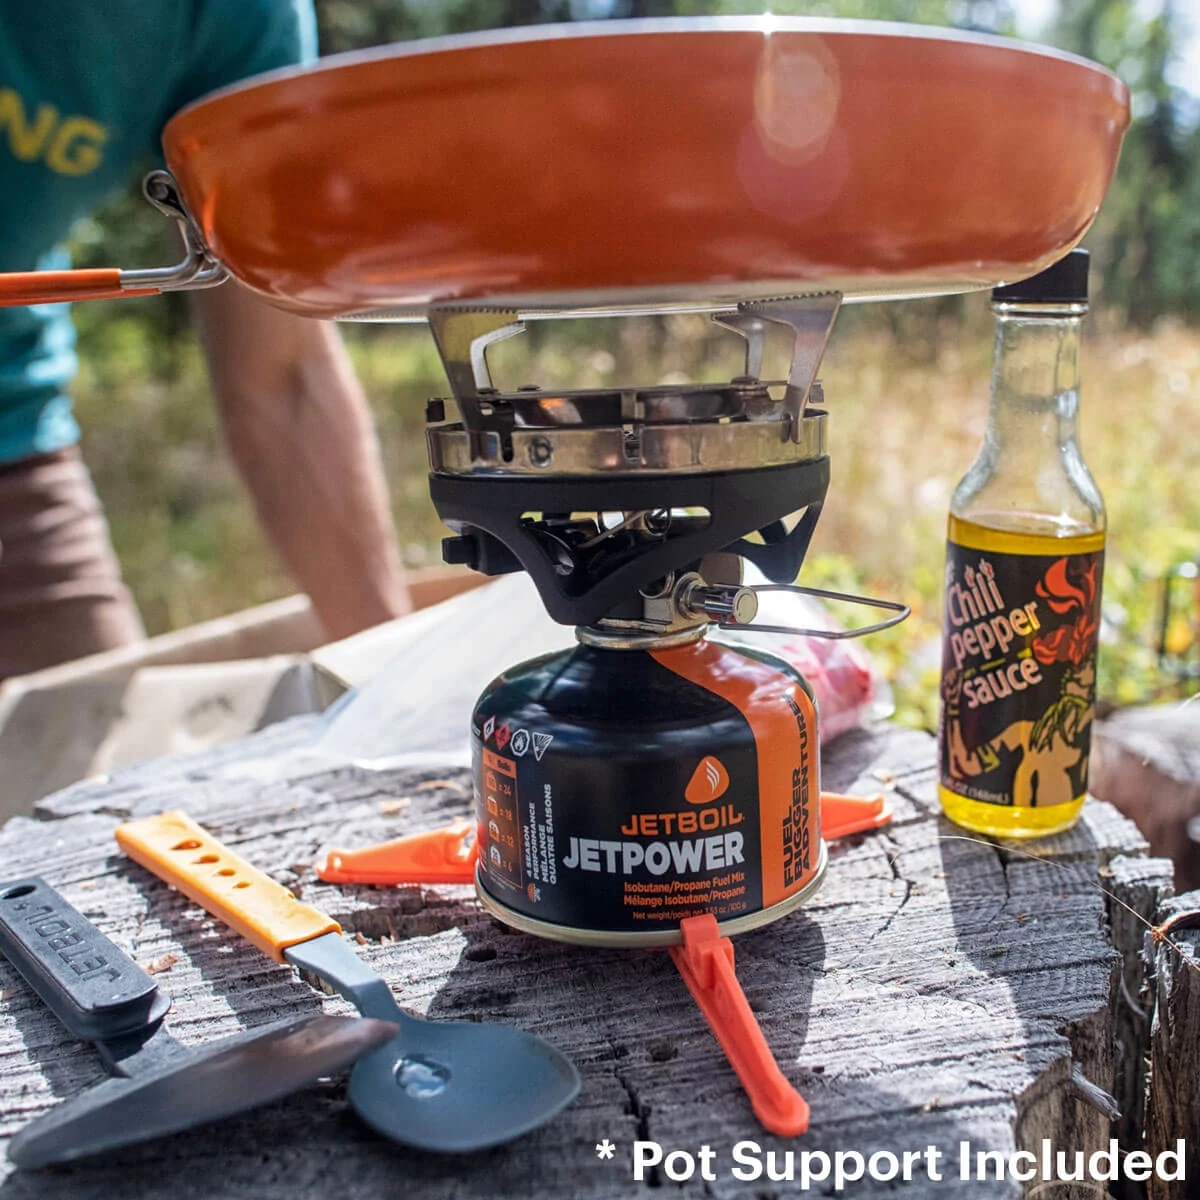 MiniMo Cooking System - Jetboil